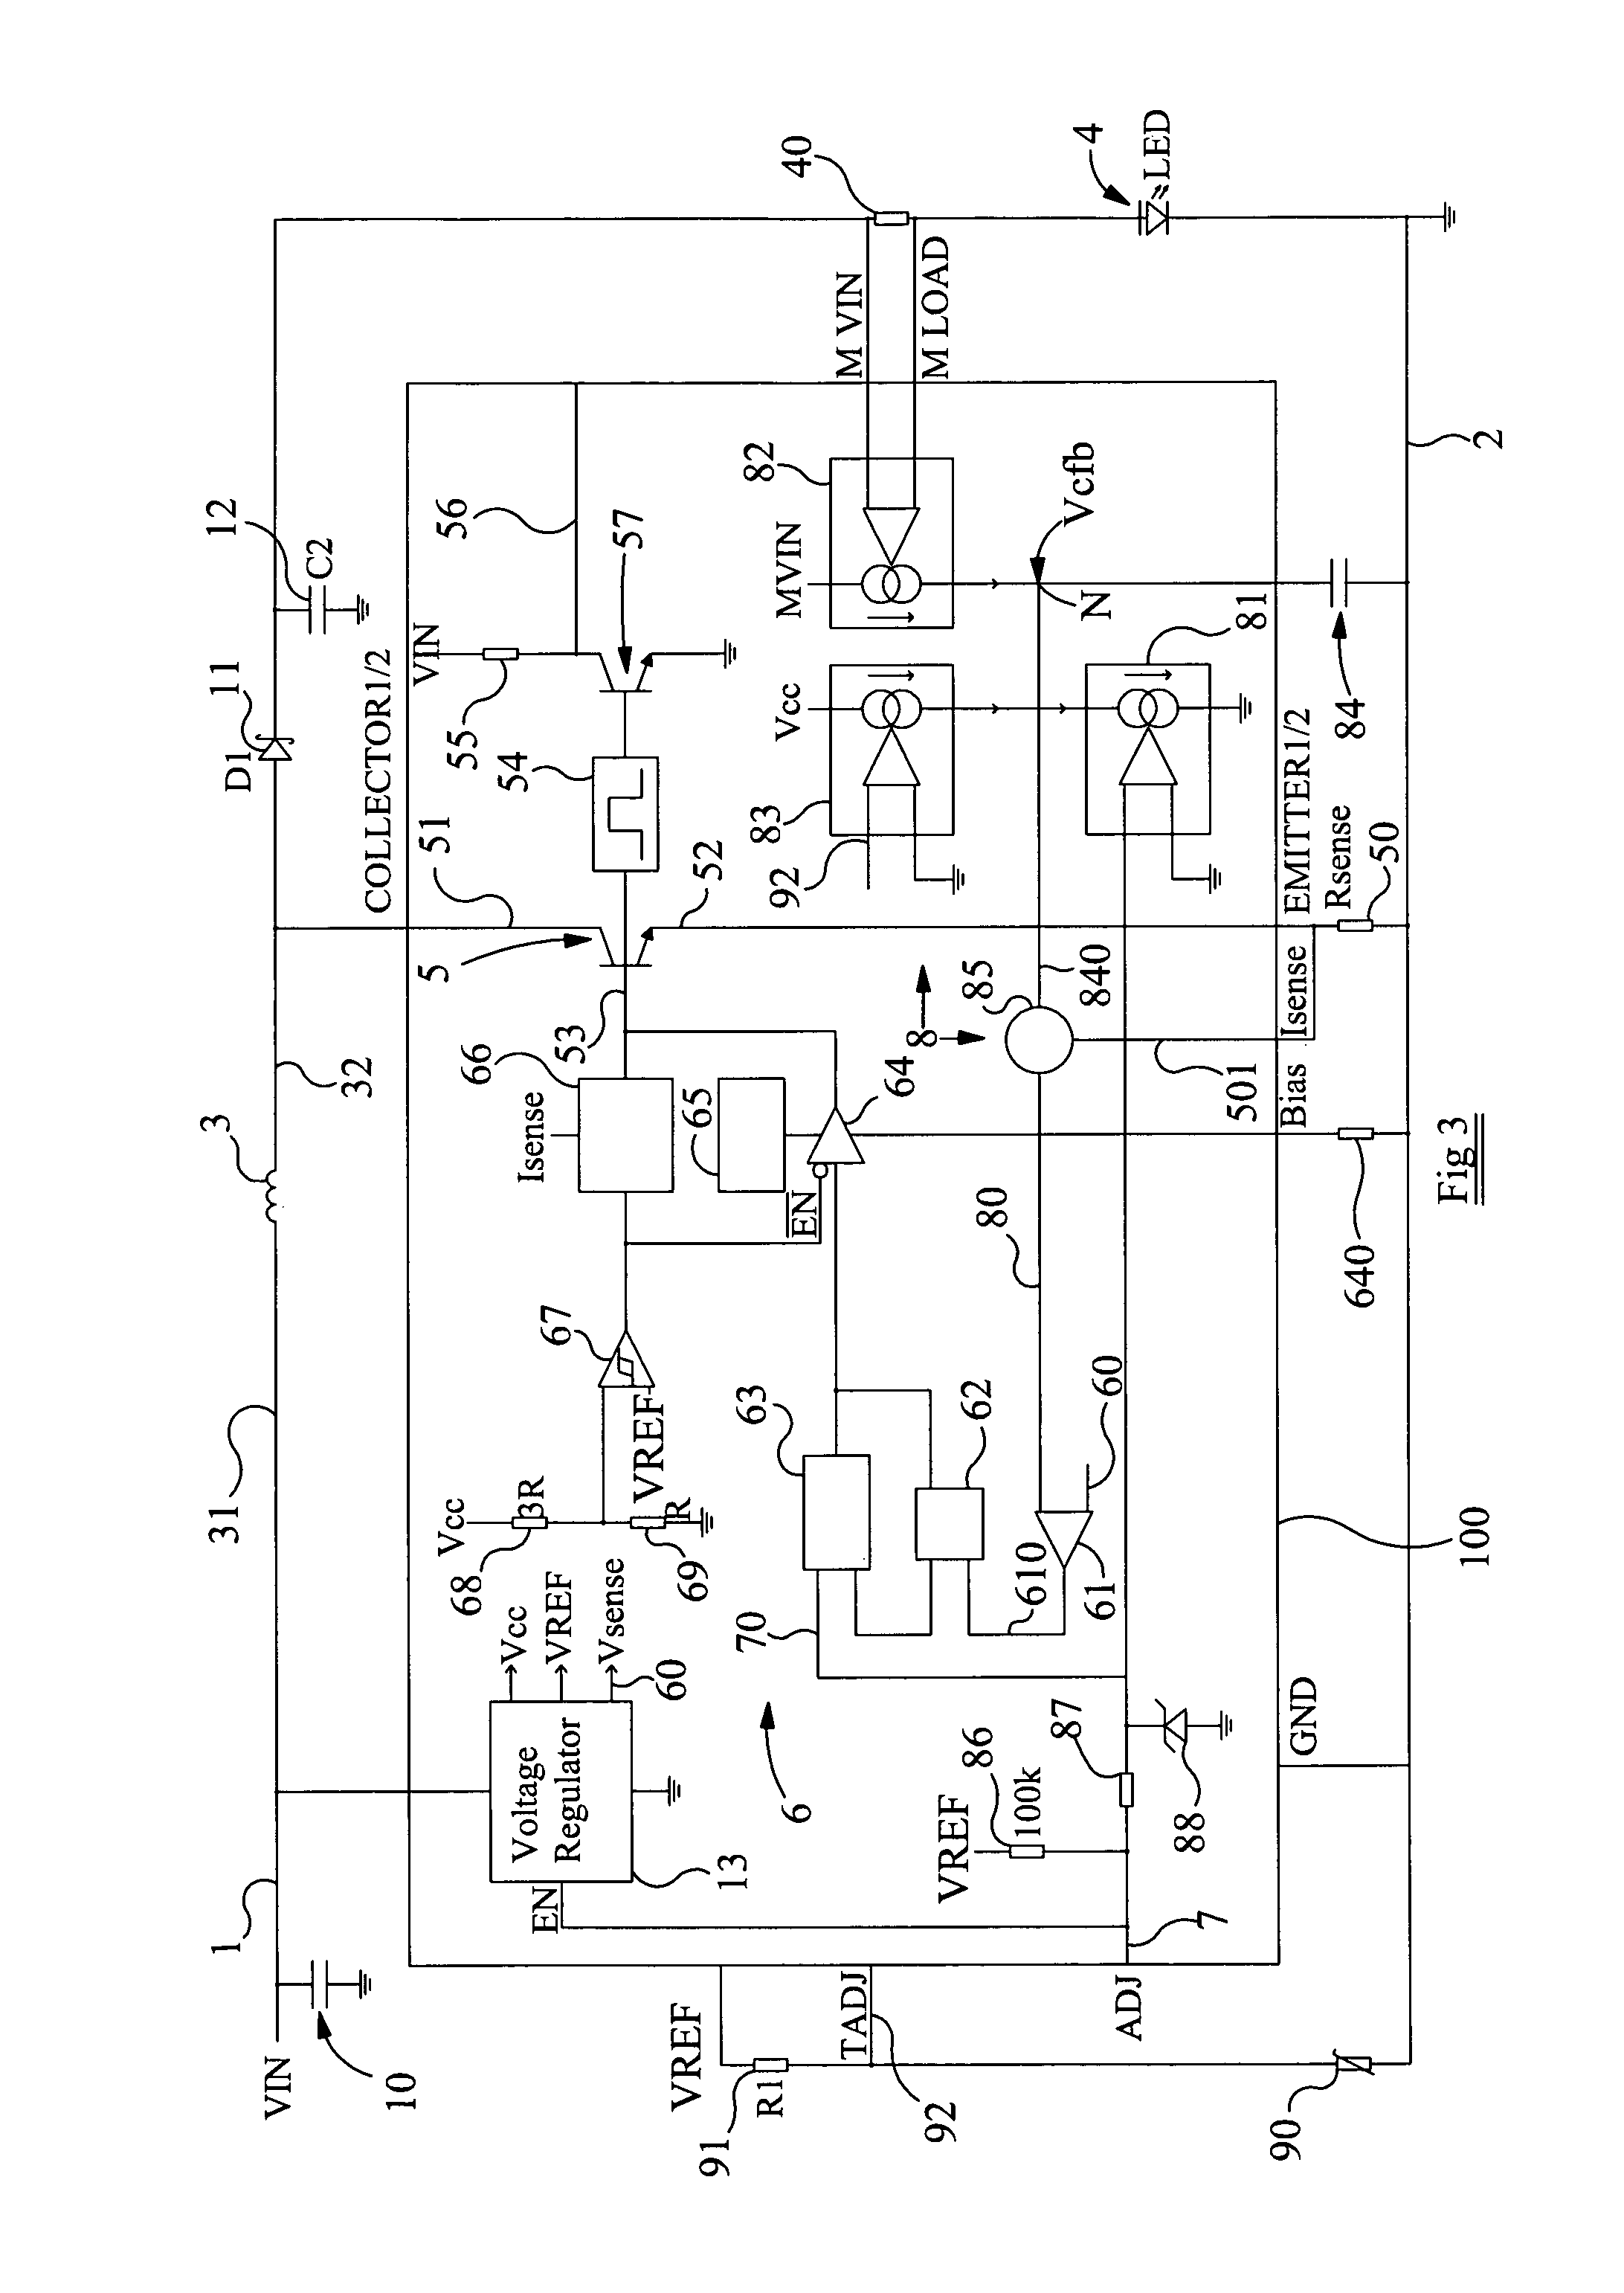 Current driving method and circuit for controlled driving of light-emitting diodes